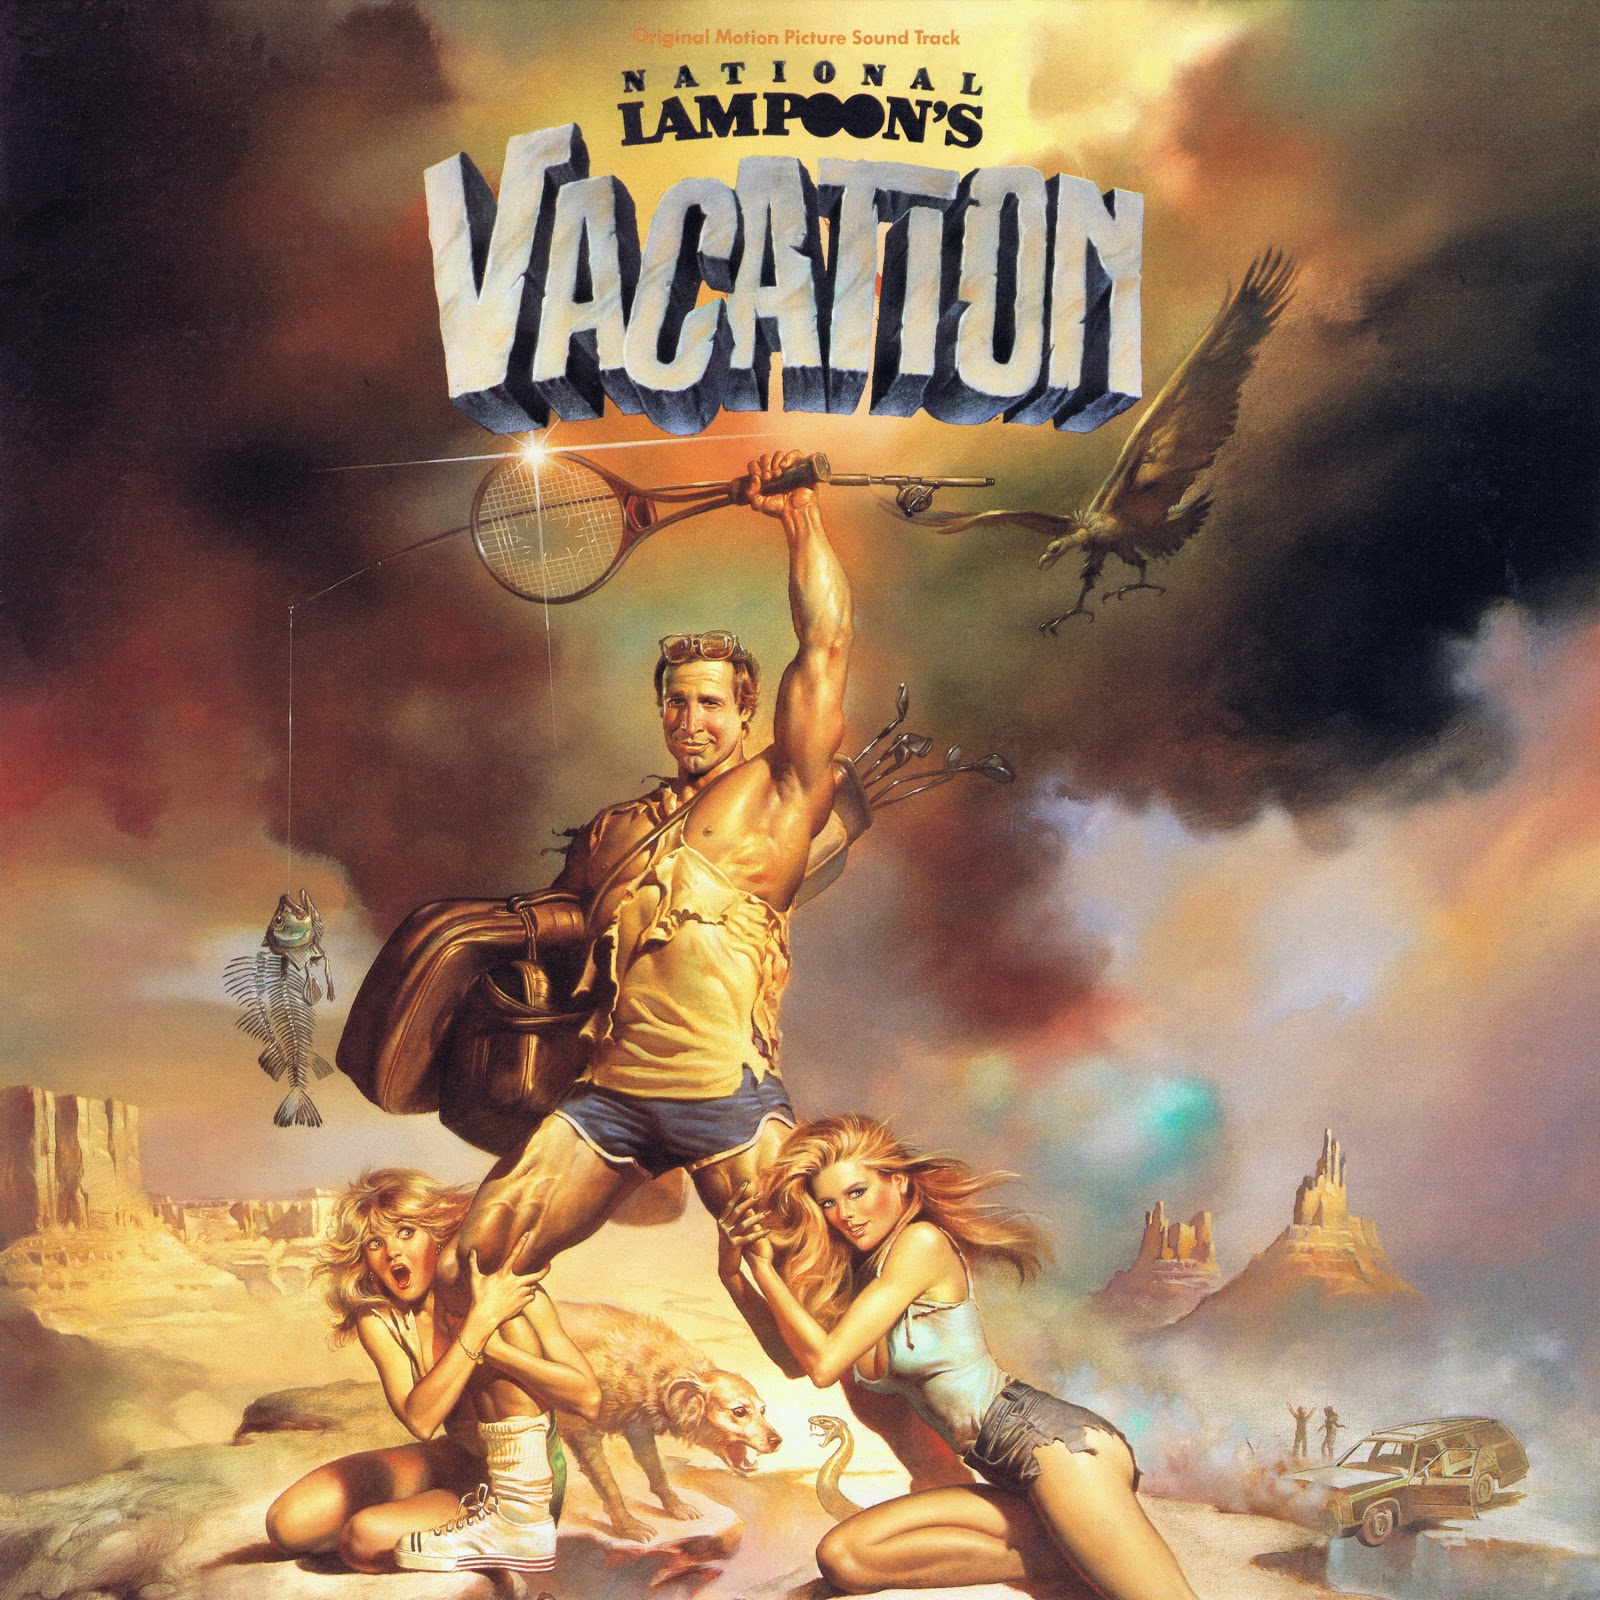 1983 National Lampoon's Vacation. 